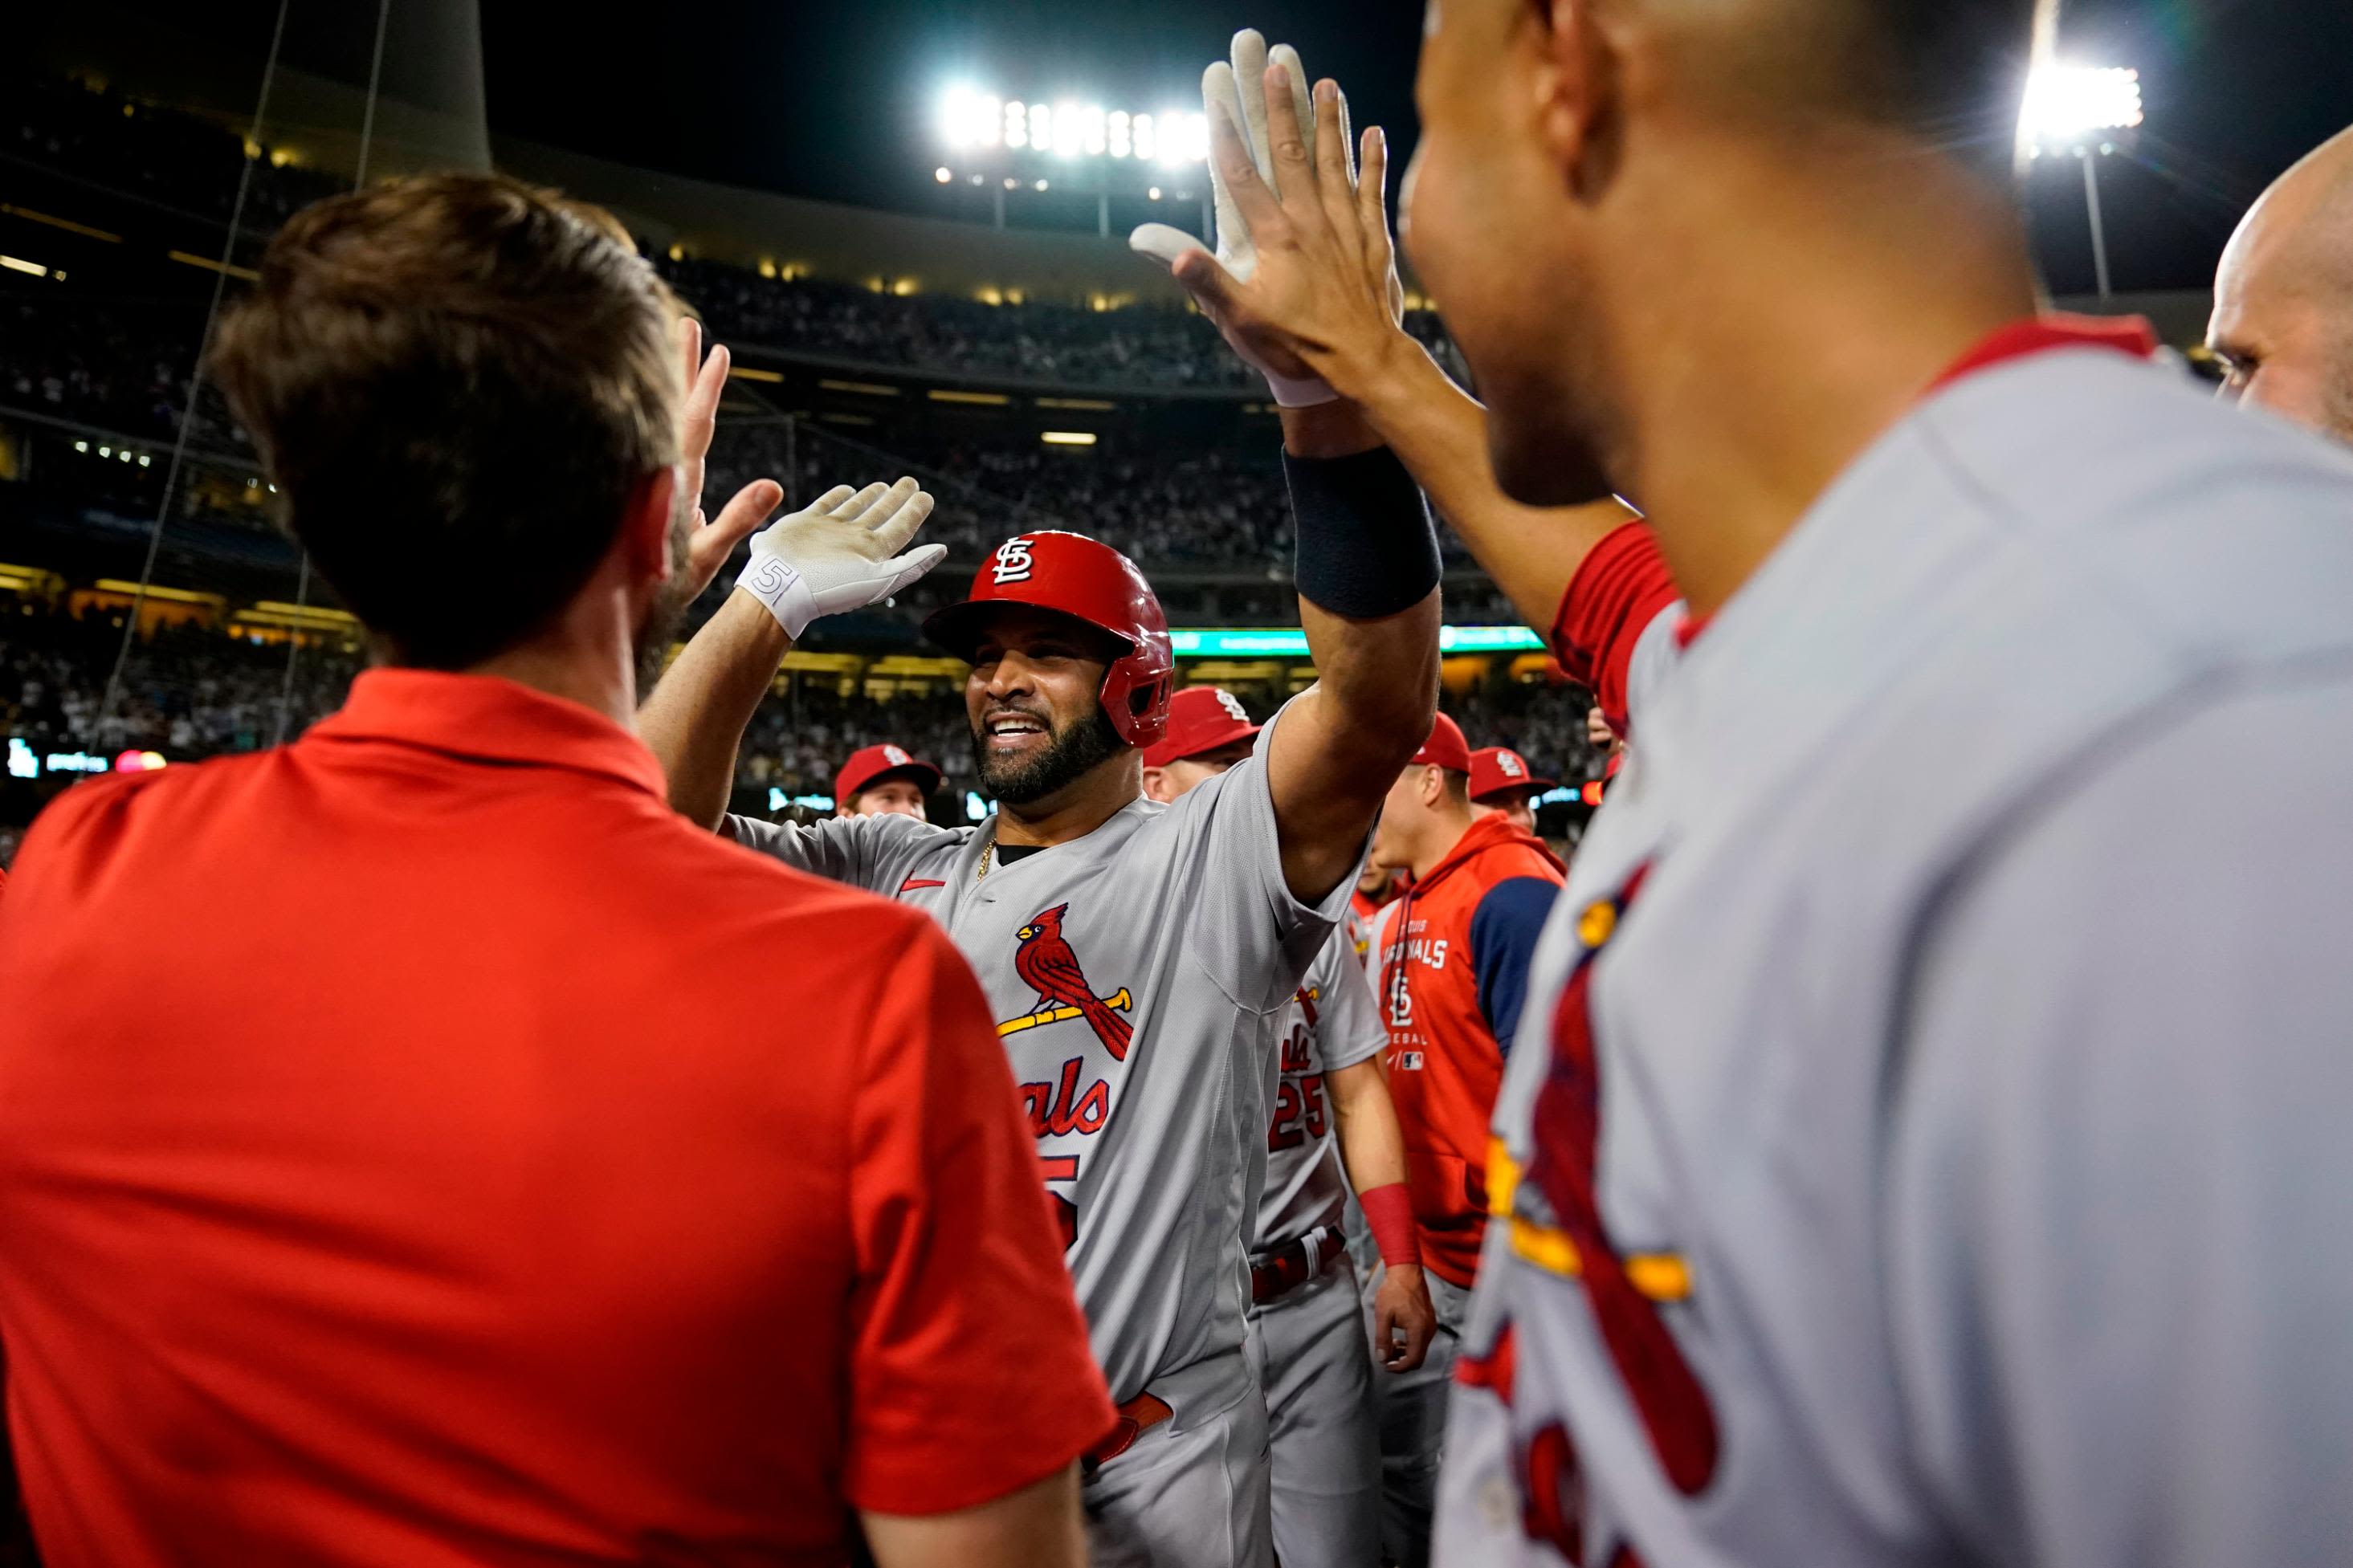 Cardinals' Albert Pujols soars into history with 700th career home